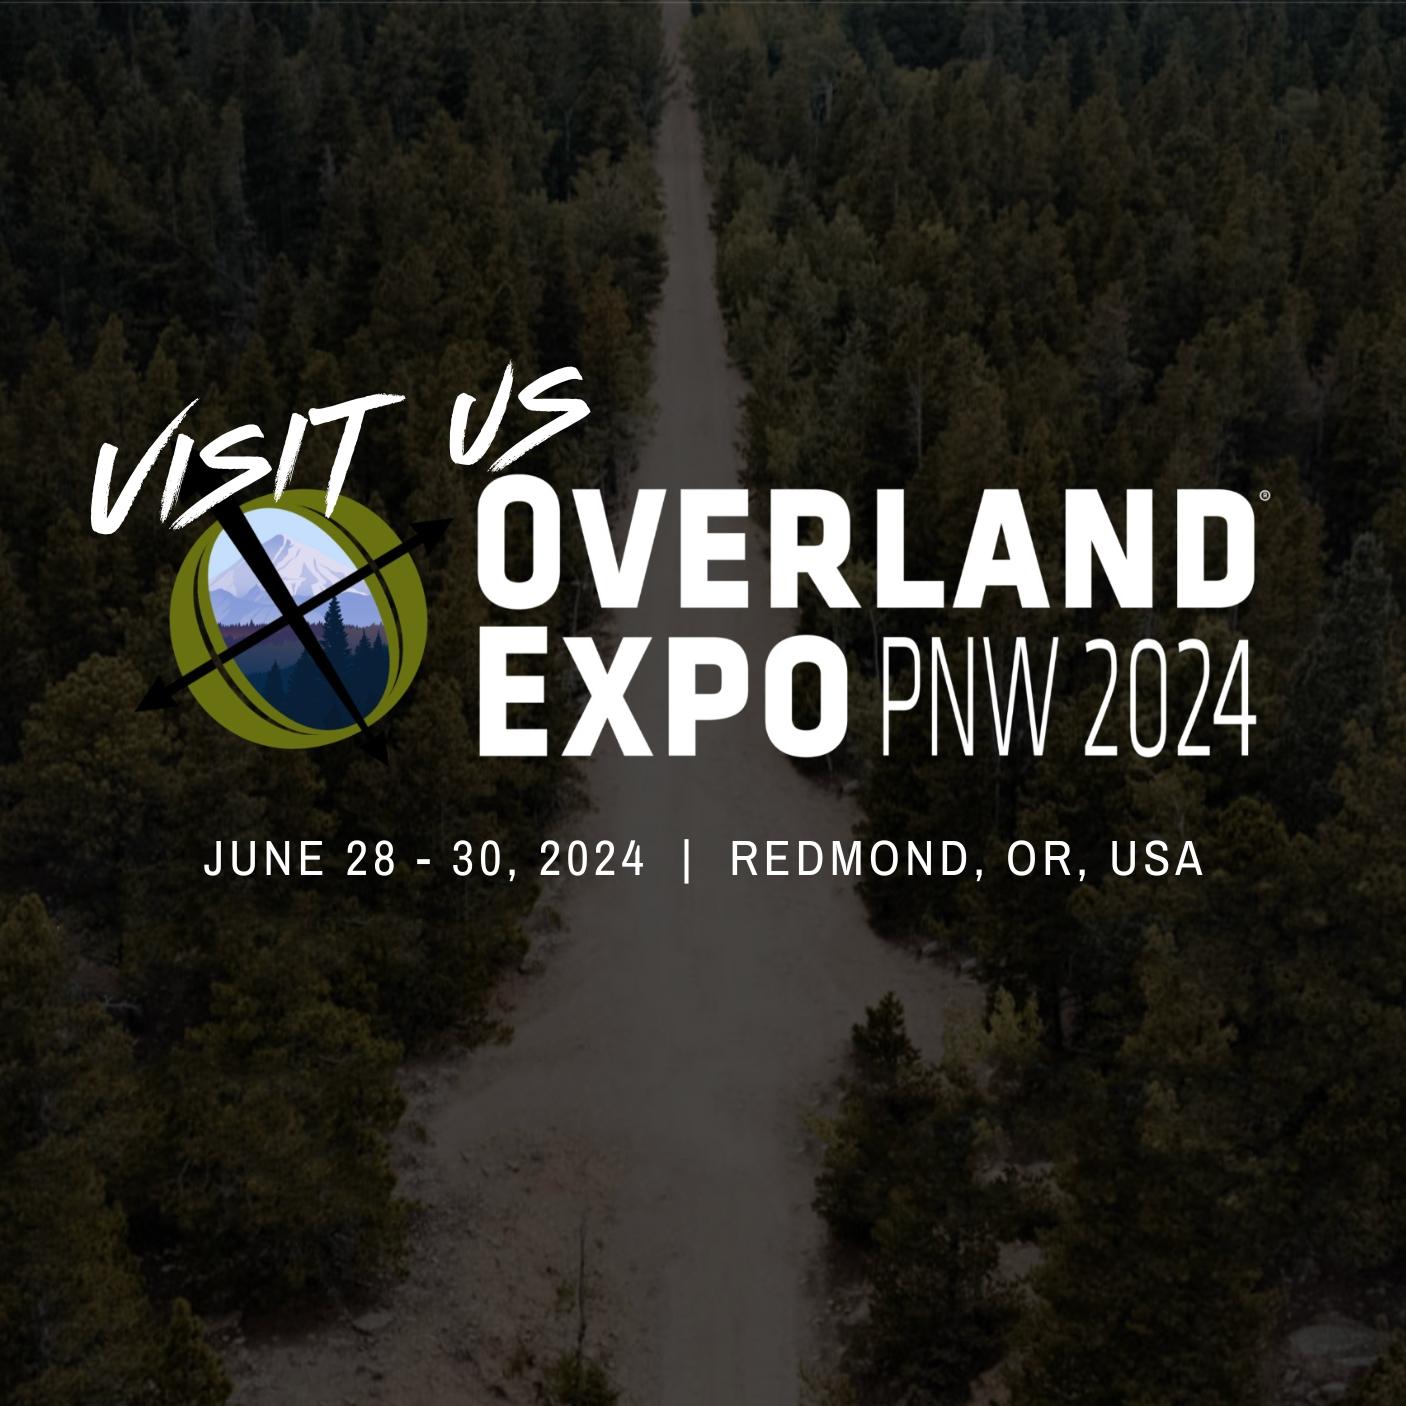 Join Us at Overland Expo PNW in Redmond, Oregon